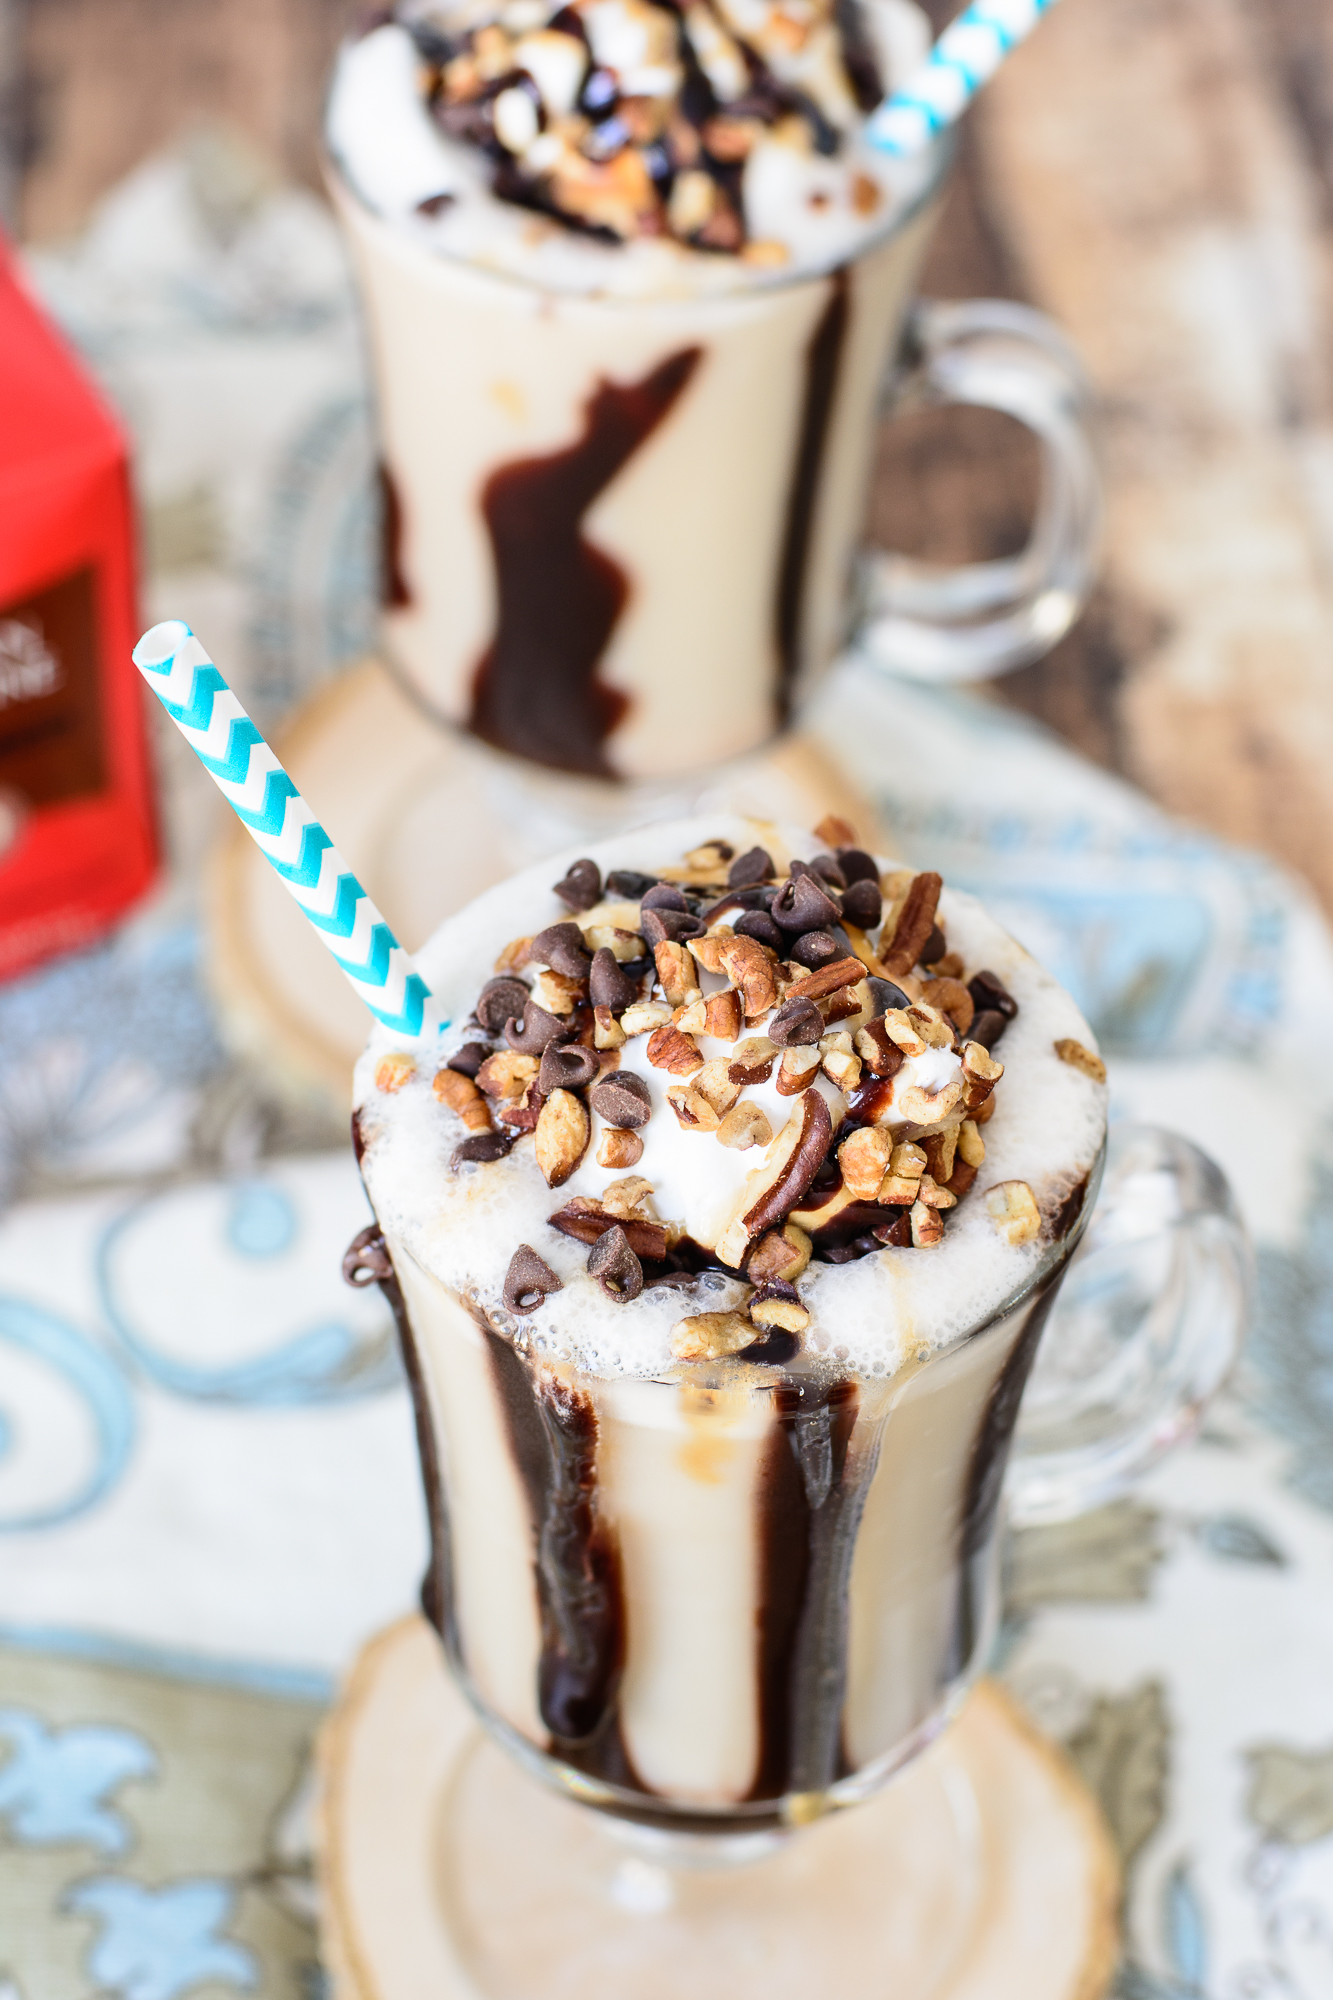 Turtle Frappucino Recipe. This frappe recipe is heaven on earth! Caramel, chocolate, pecans and coffee combine to make an incredible cold coffee drink perfect for summer. You are going to love this frappe recipe! 